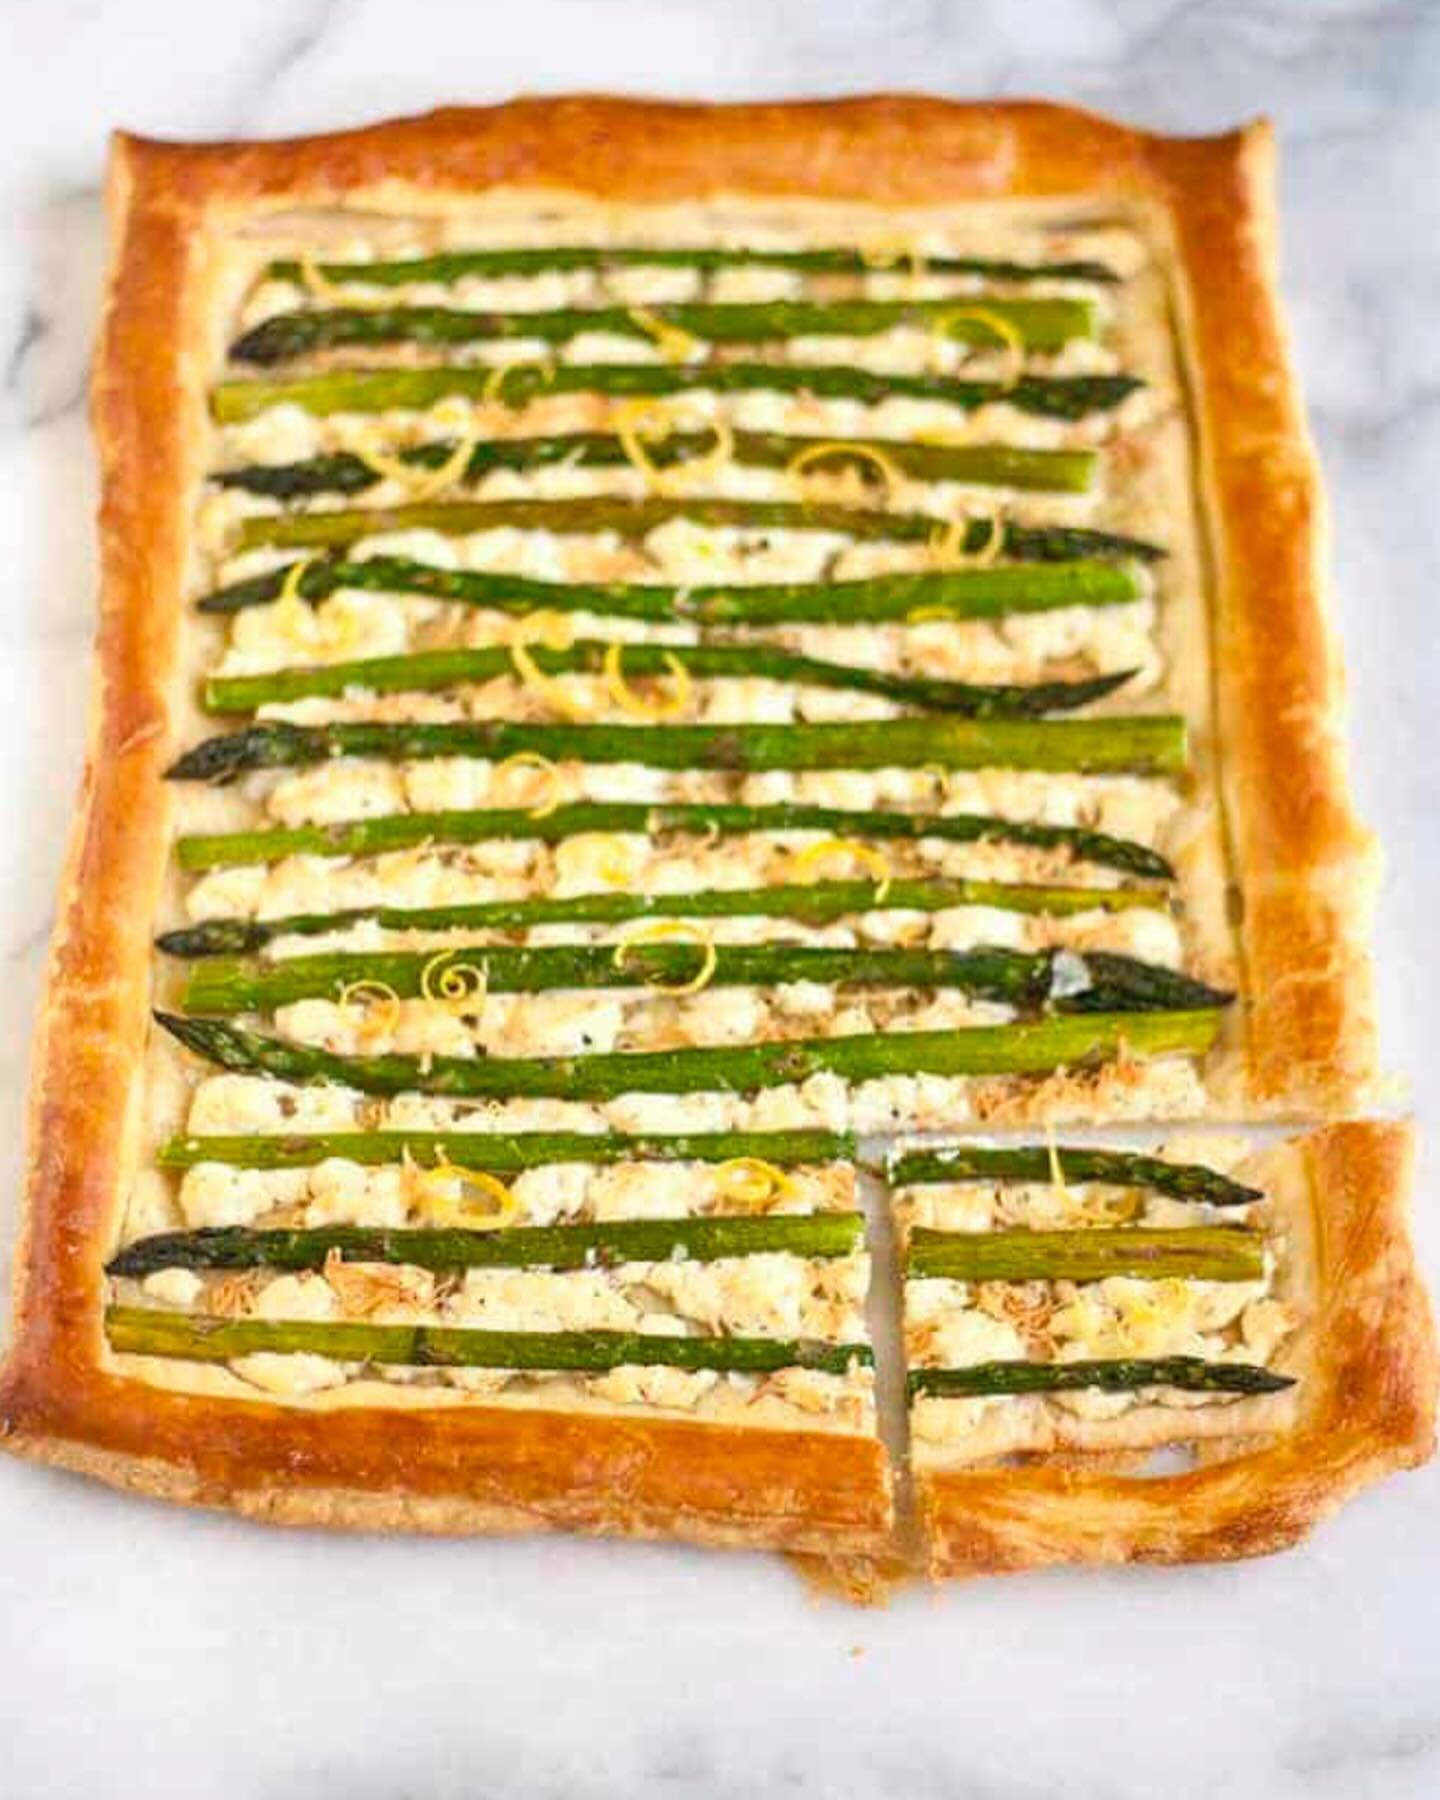 BEAUTIFUL FOOD BY DESIGN | What are you doing for Mom this year? Perhaps a stay at home leisurely brunch is on the agenda? Here&rsquo;s an easy little gem to include &ndash; Lemon Asparagus Tart, part of a Bijouxs brunch. Leave a light on. 

TAP BIO 